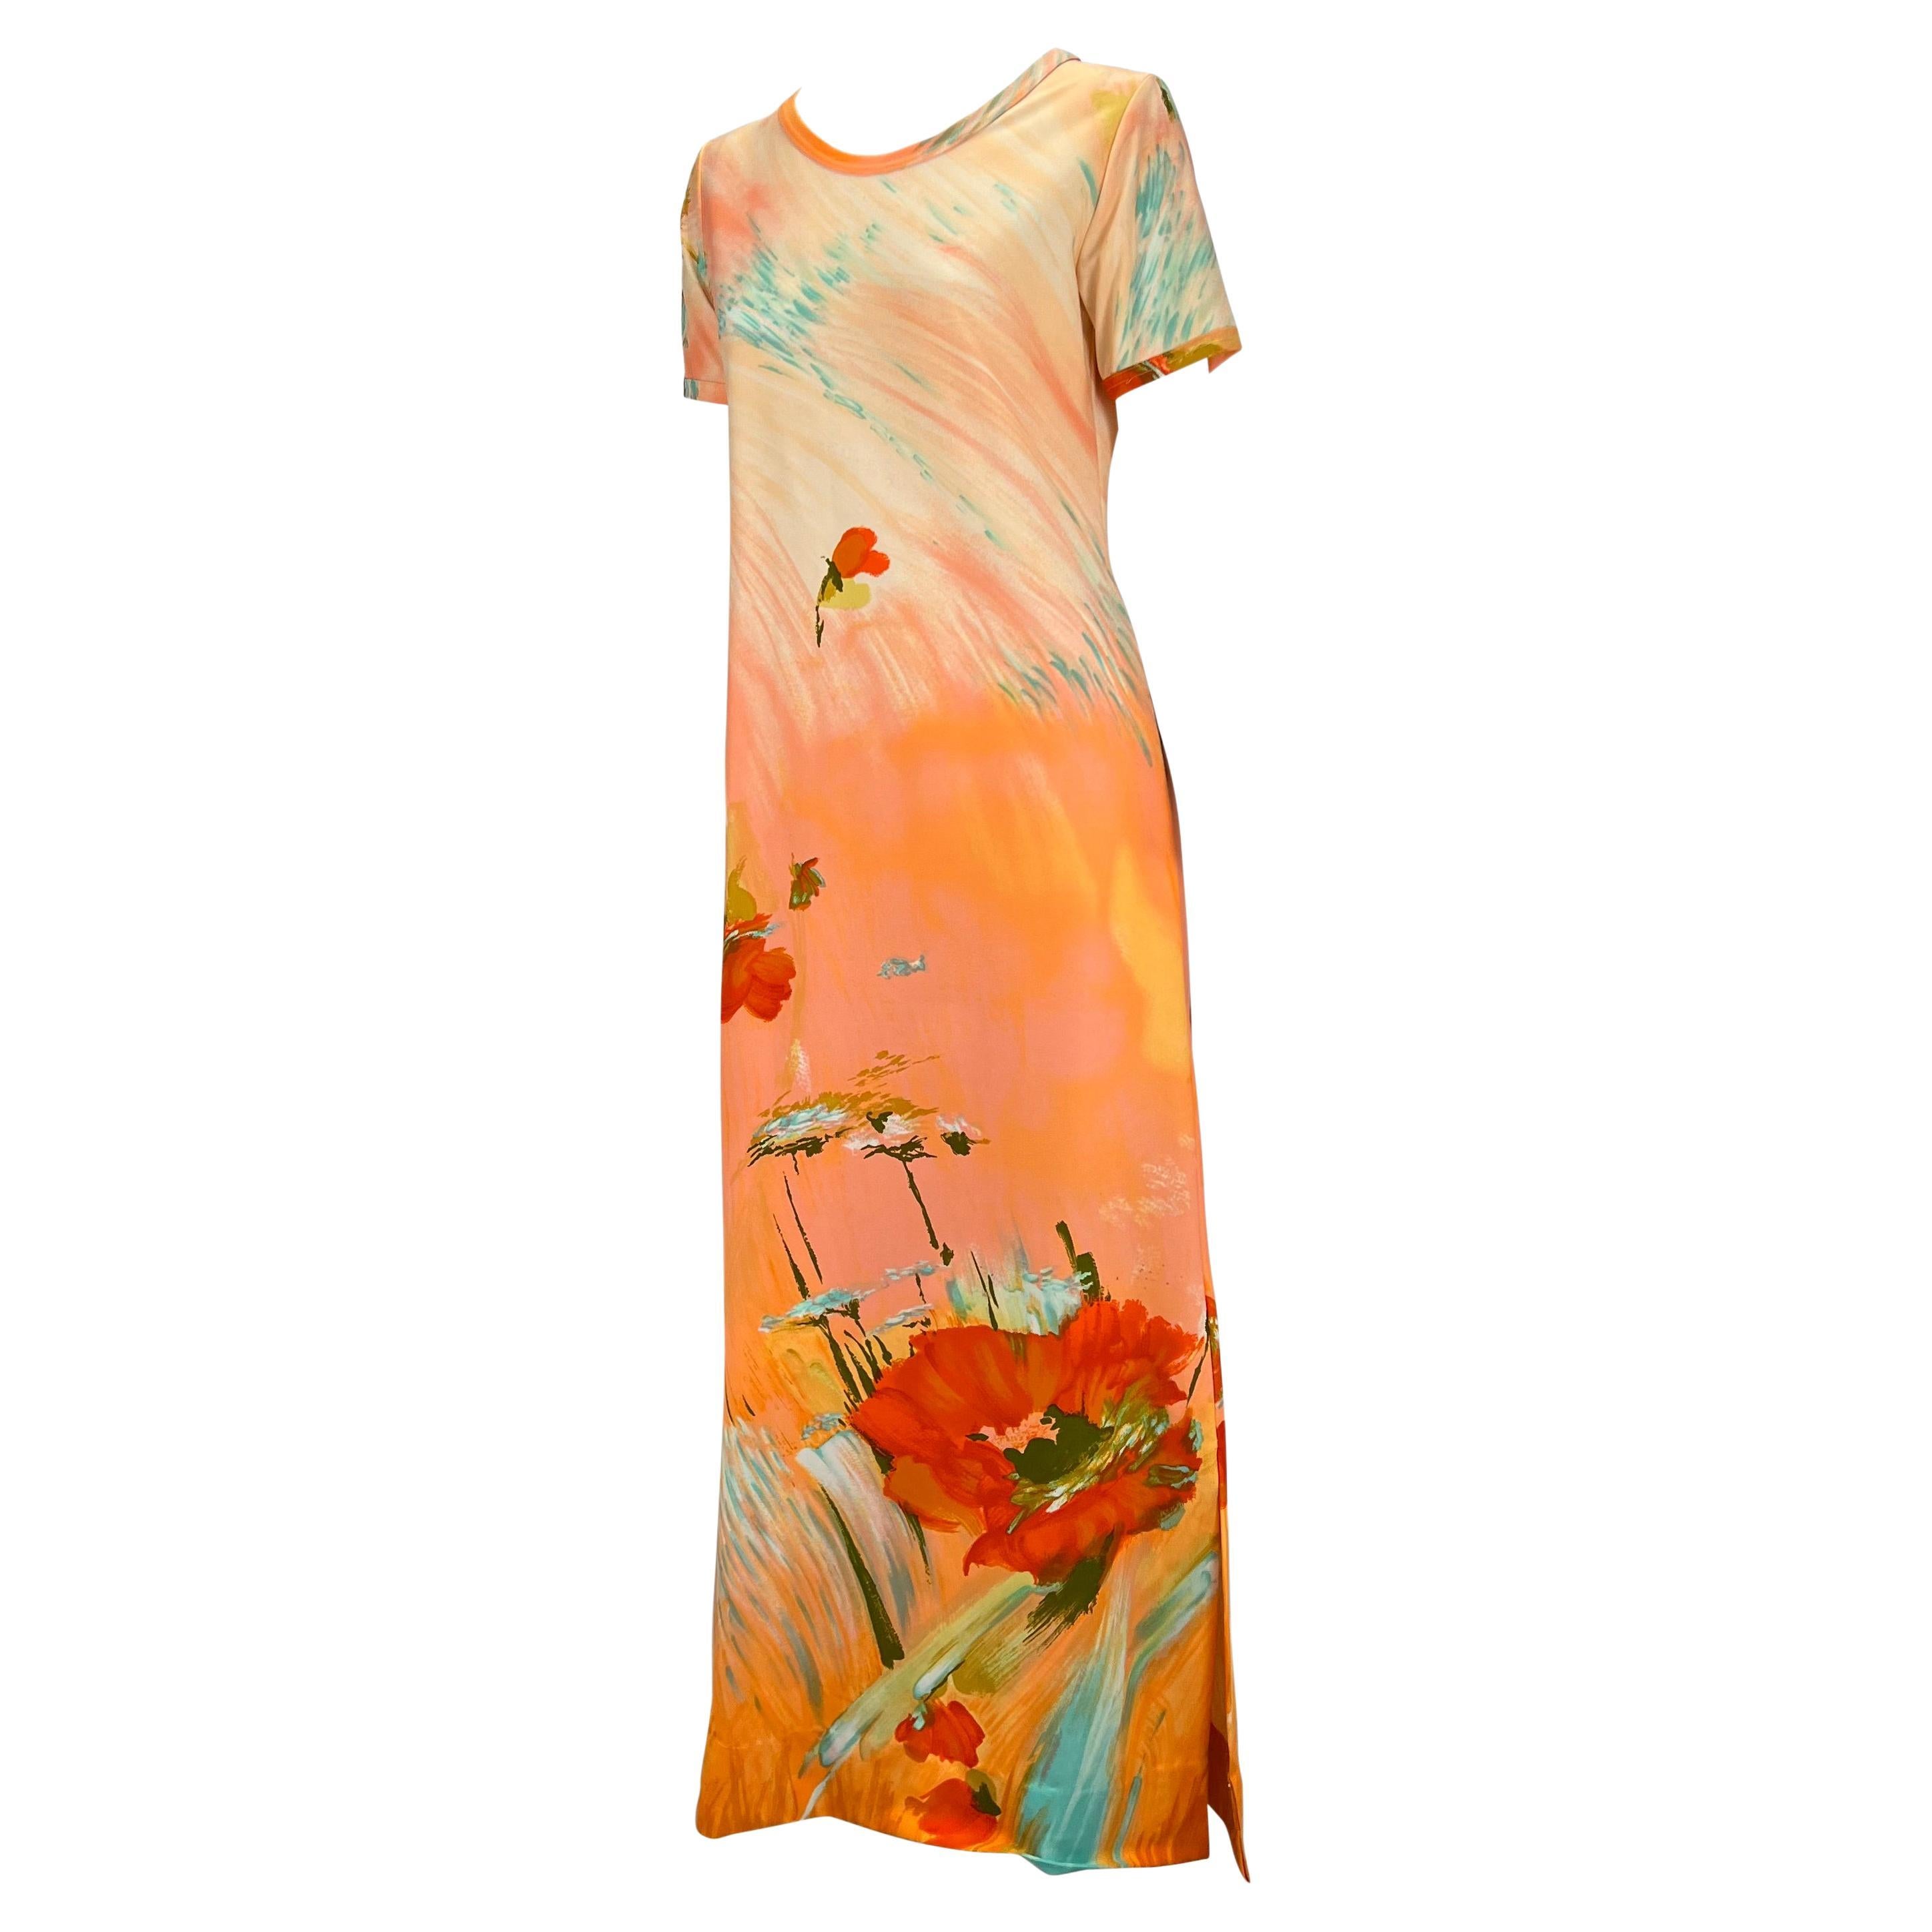 TheRealList presents: a bright pastel floral Lanvin dress. From the 1970s, this maxi dress features short sleeves and a scoop neckline with slits on both sides. The has a floral motif and gives the appearance of watercolor brush strokes. A beautiful